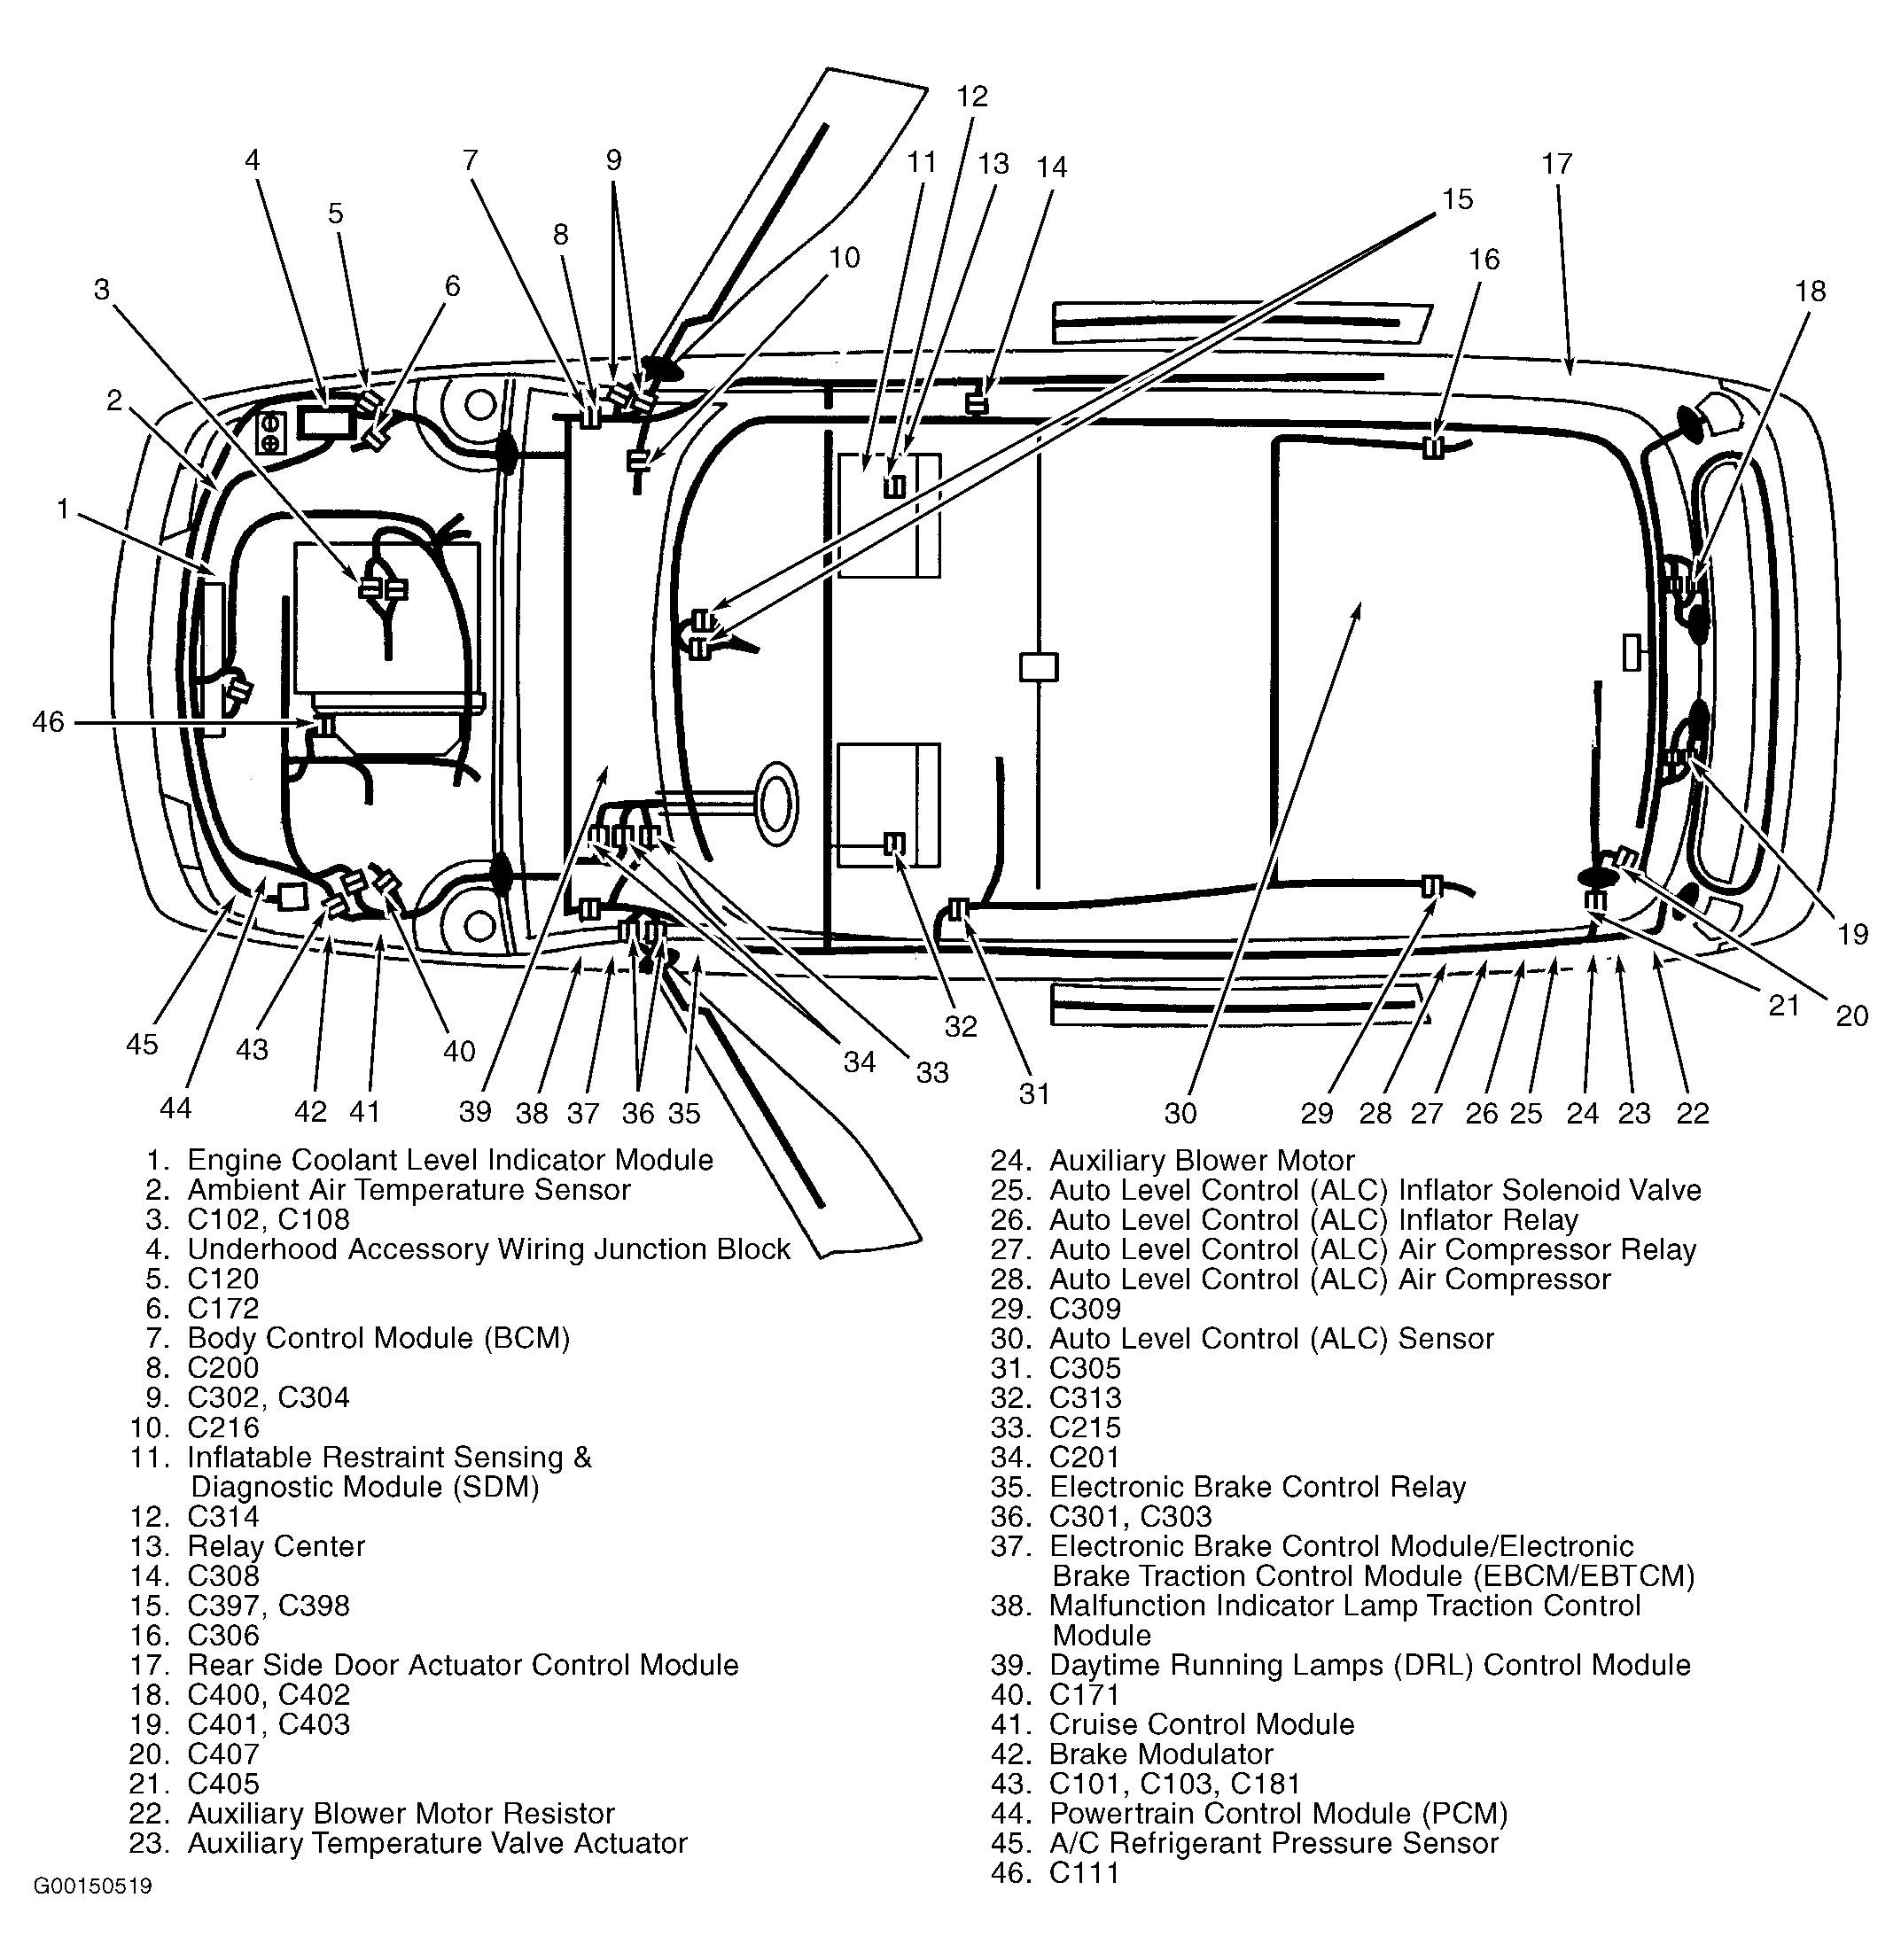 Chevrolet Venture 1998 - Component Locations -  Overview Of Vehicle